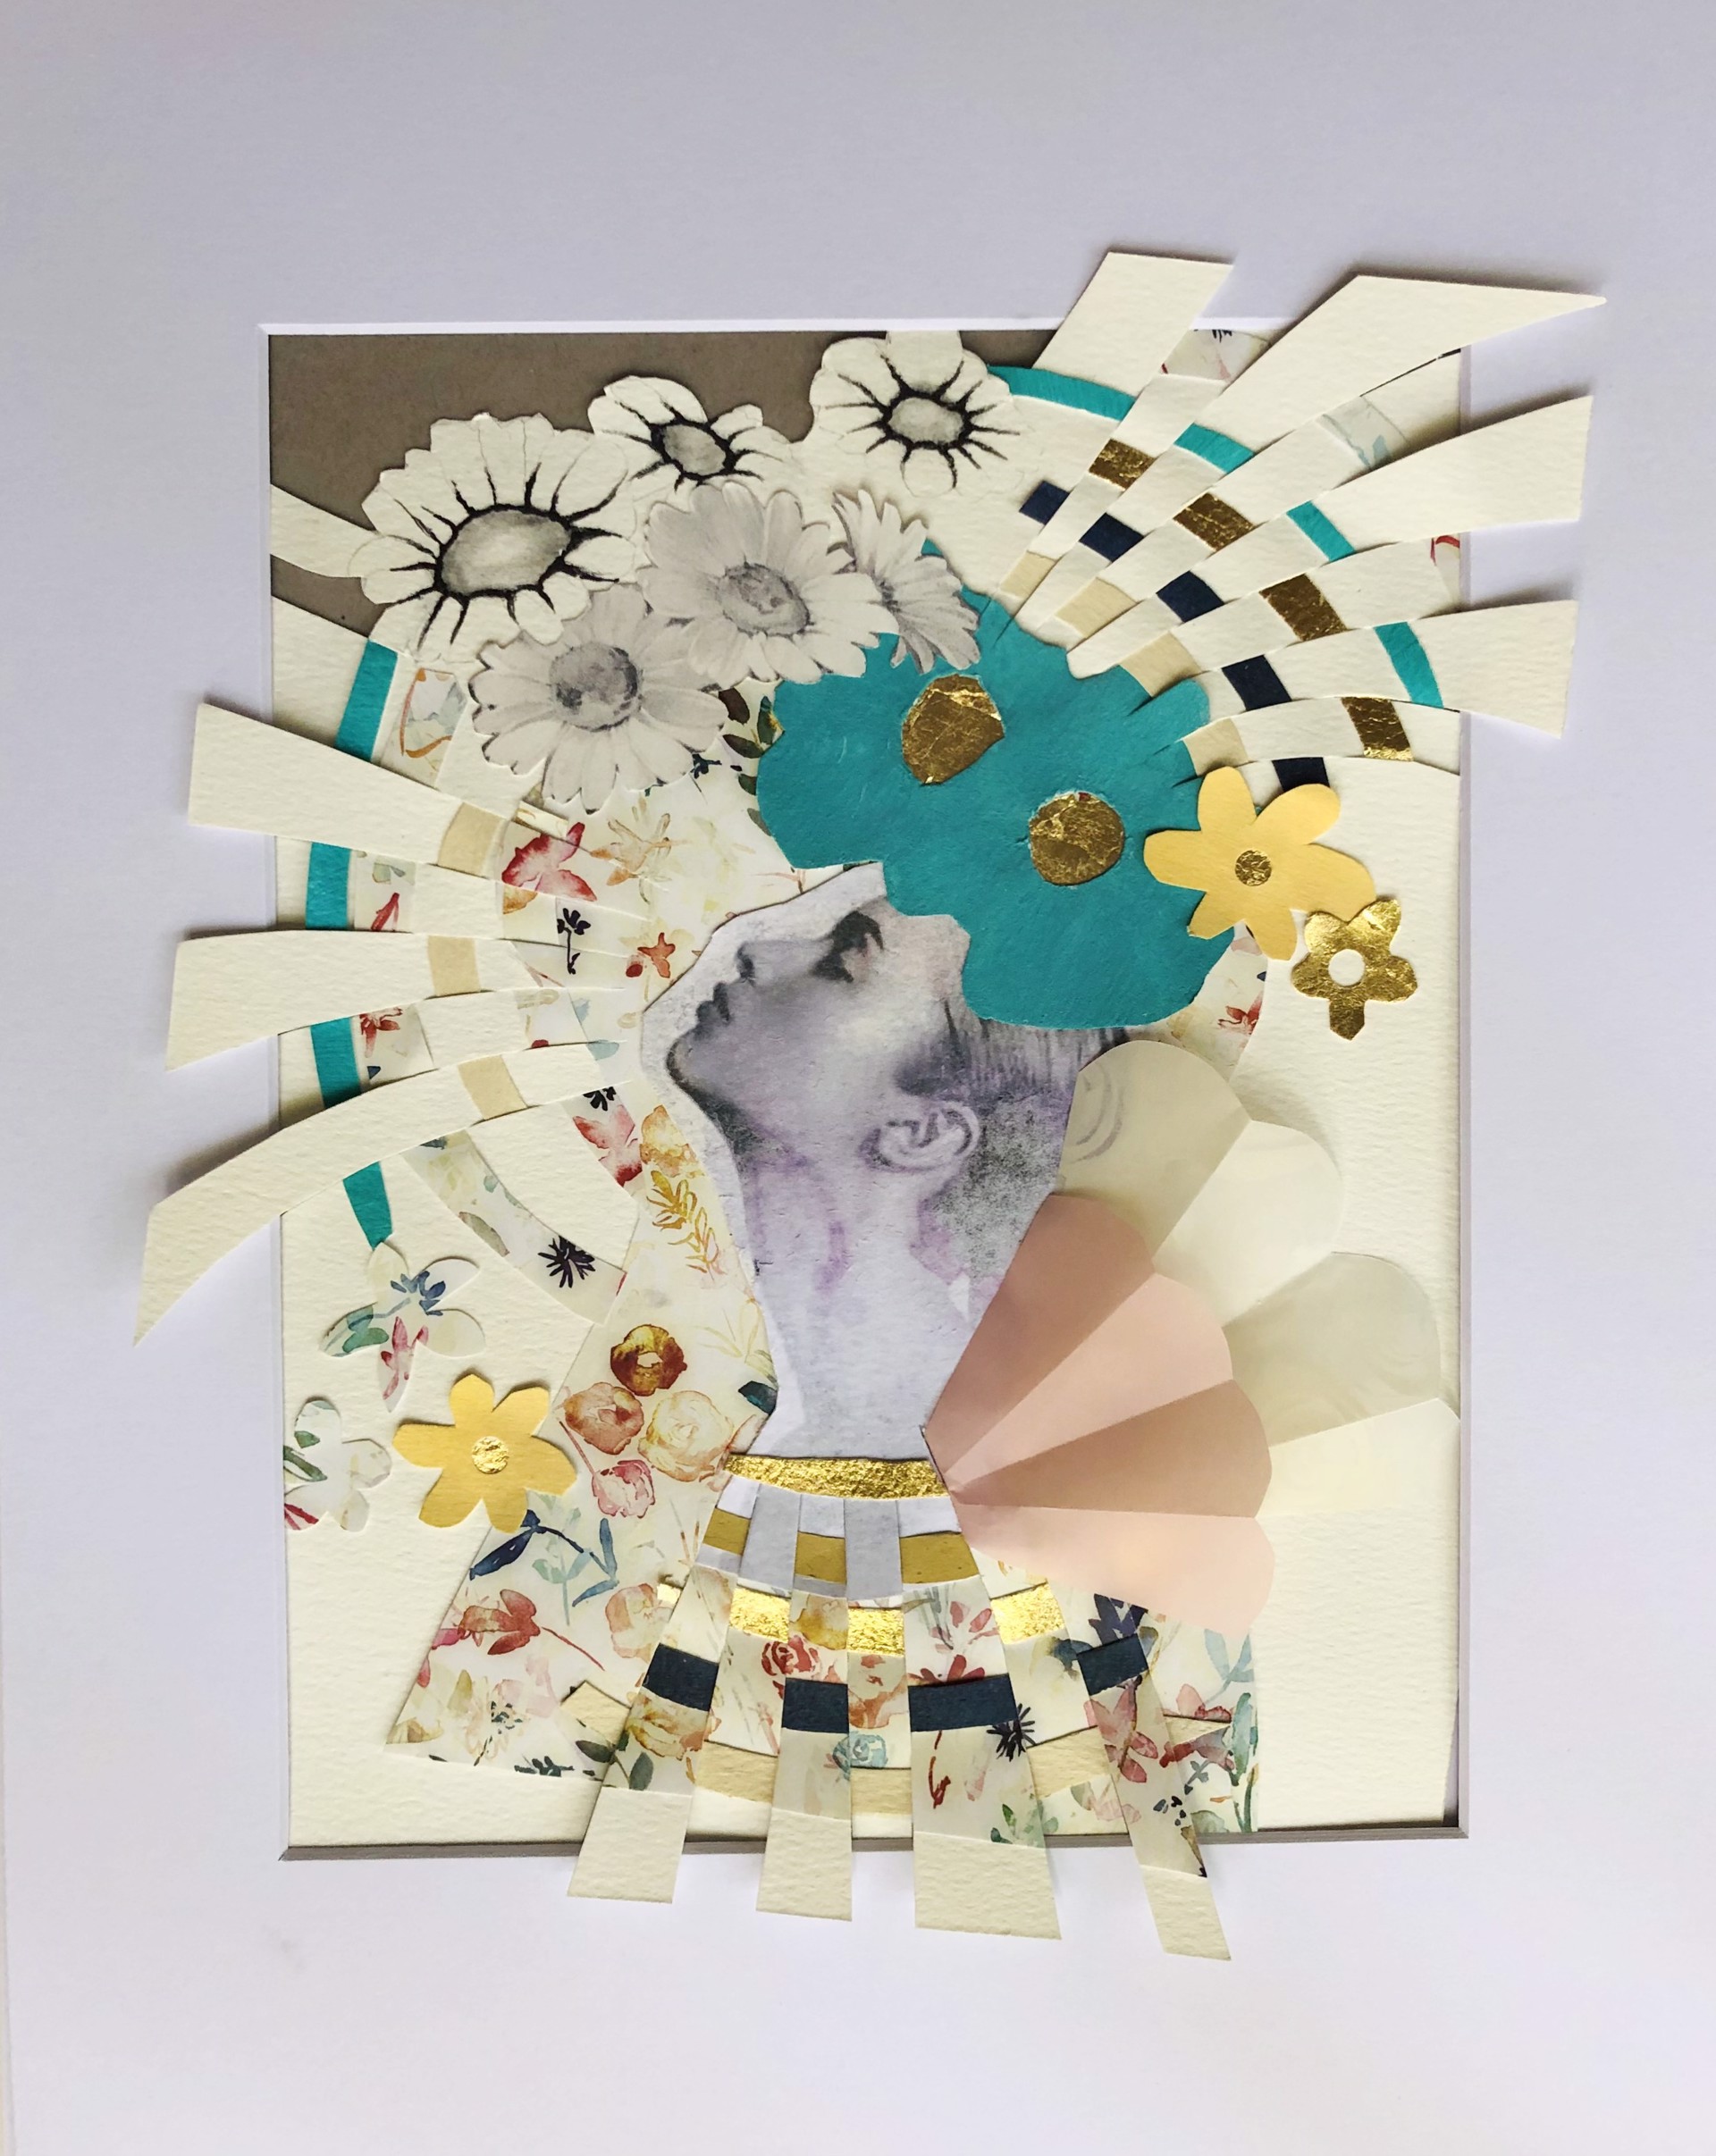 Flower Queen Collage by Beth Aronoff